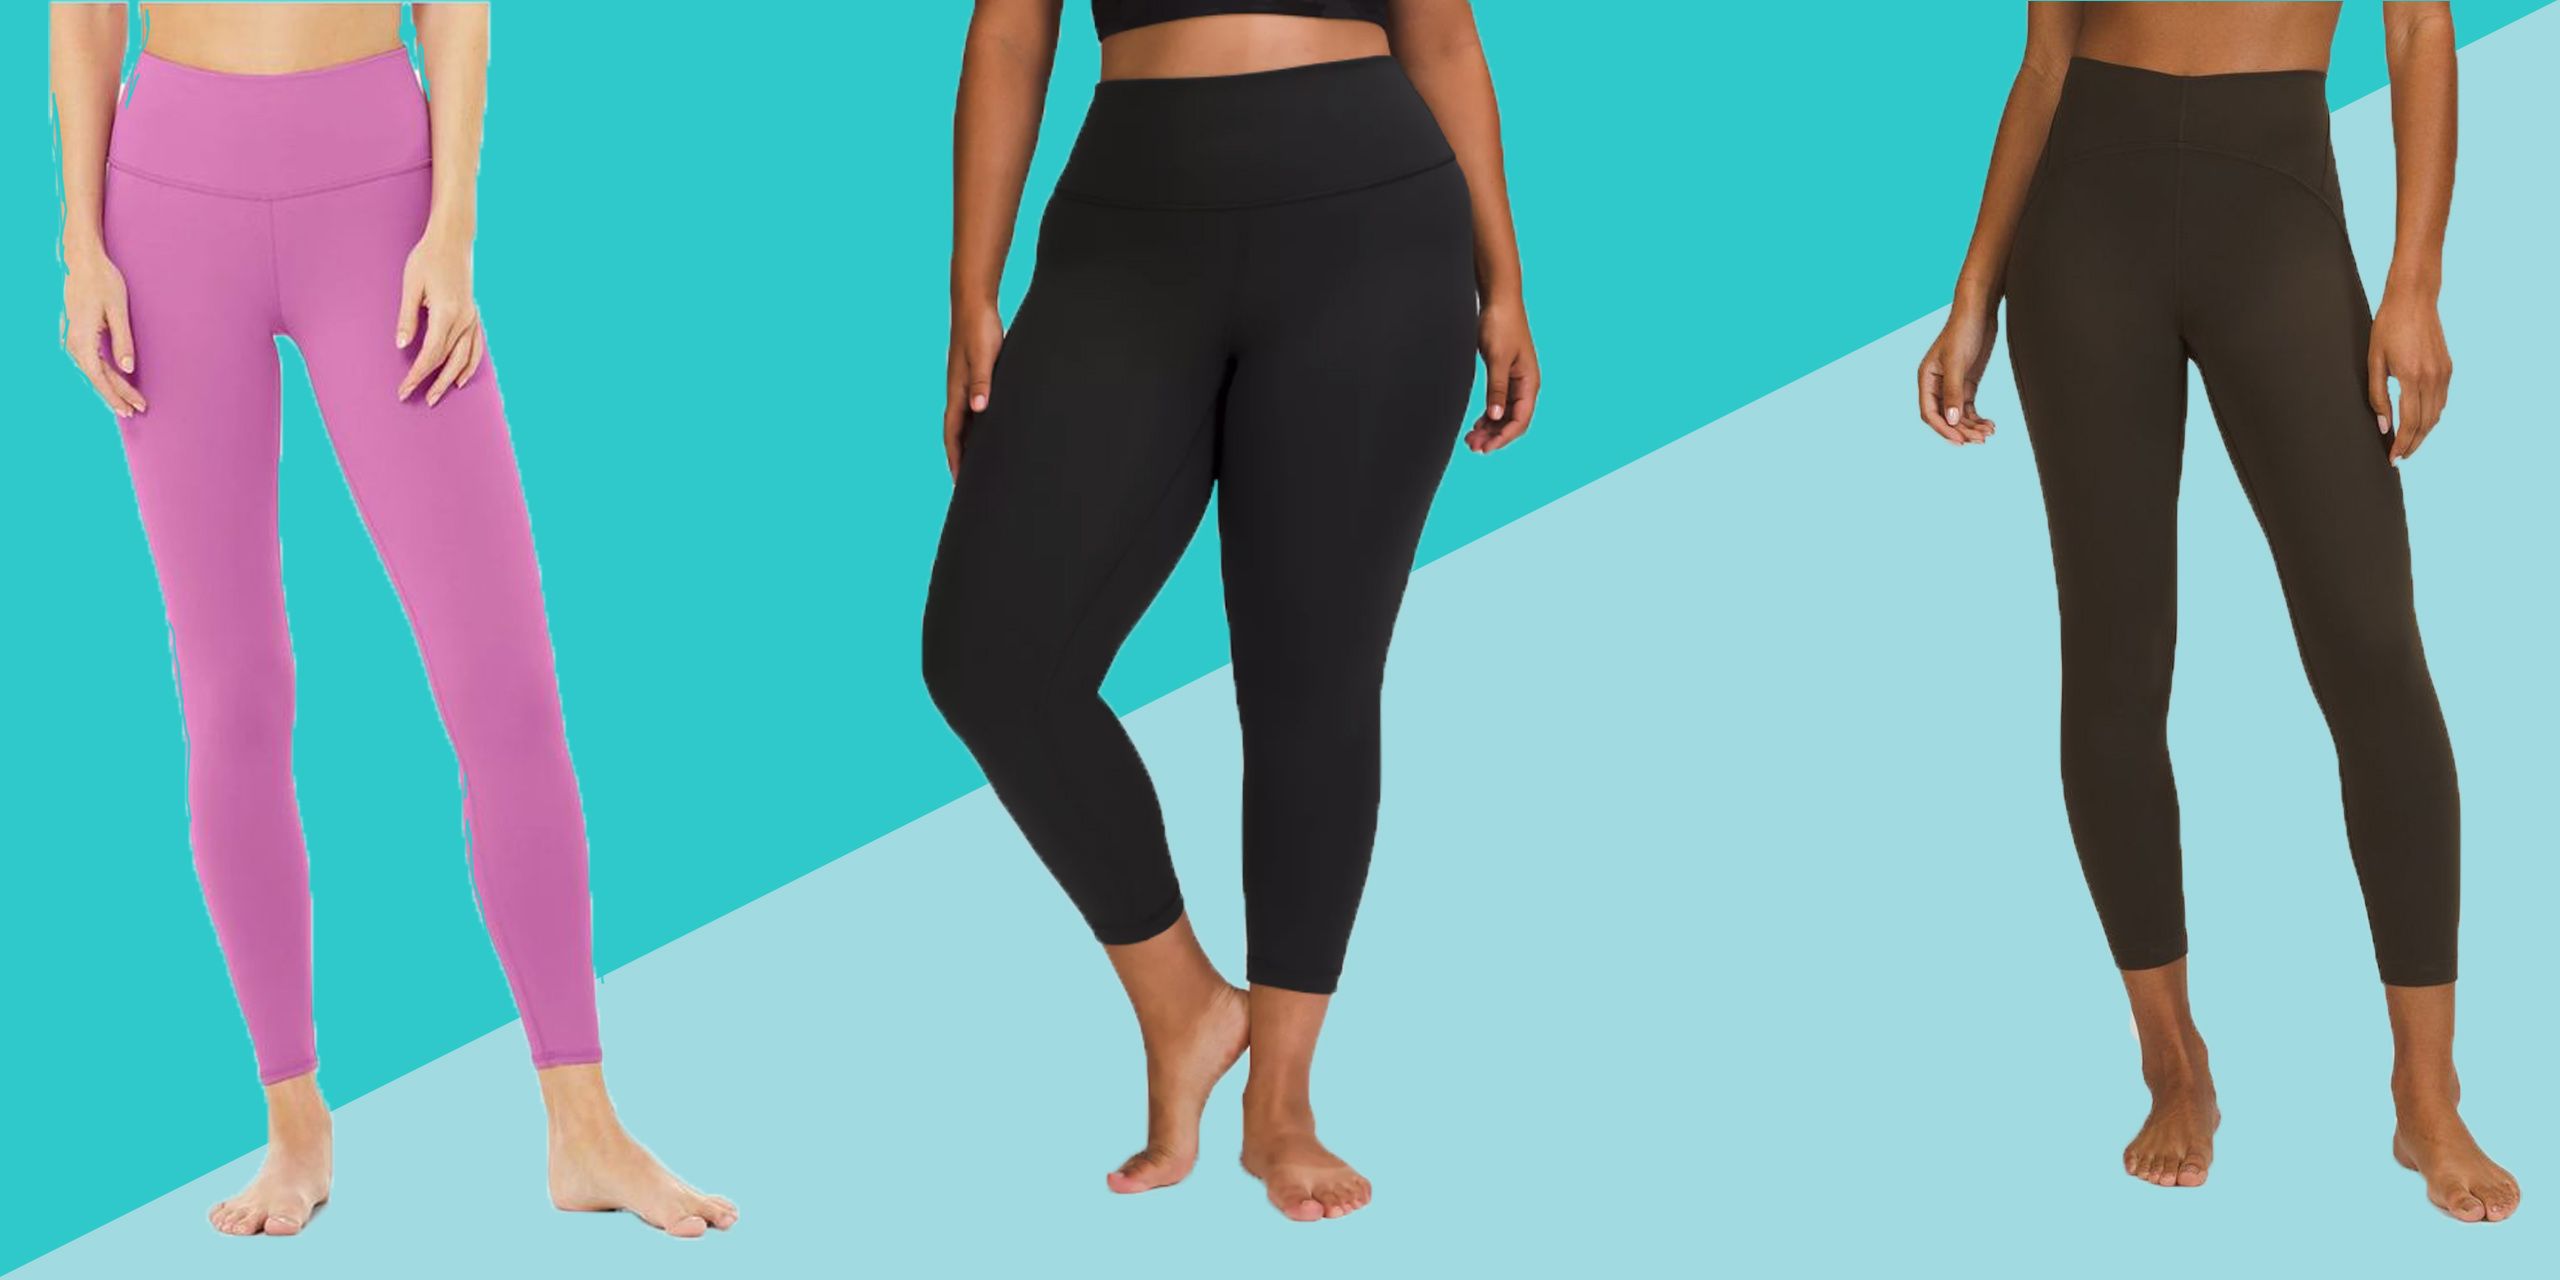 High Waisted Leggings for Women- 4 Colors - Athletic Tummy Control Pants  for Running Cycling Yoga Workout, Soft Ankle-Length Opaque Slim with Side  Pocket, M-2XL Black 